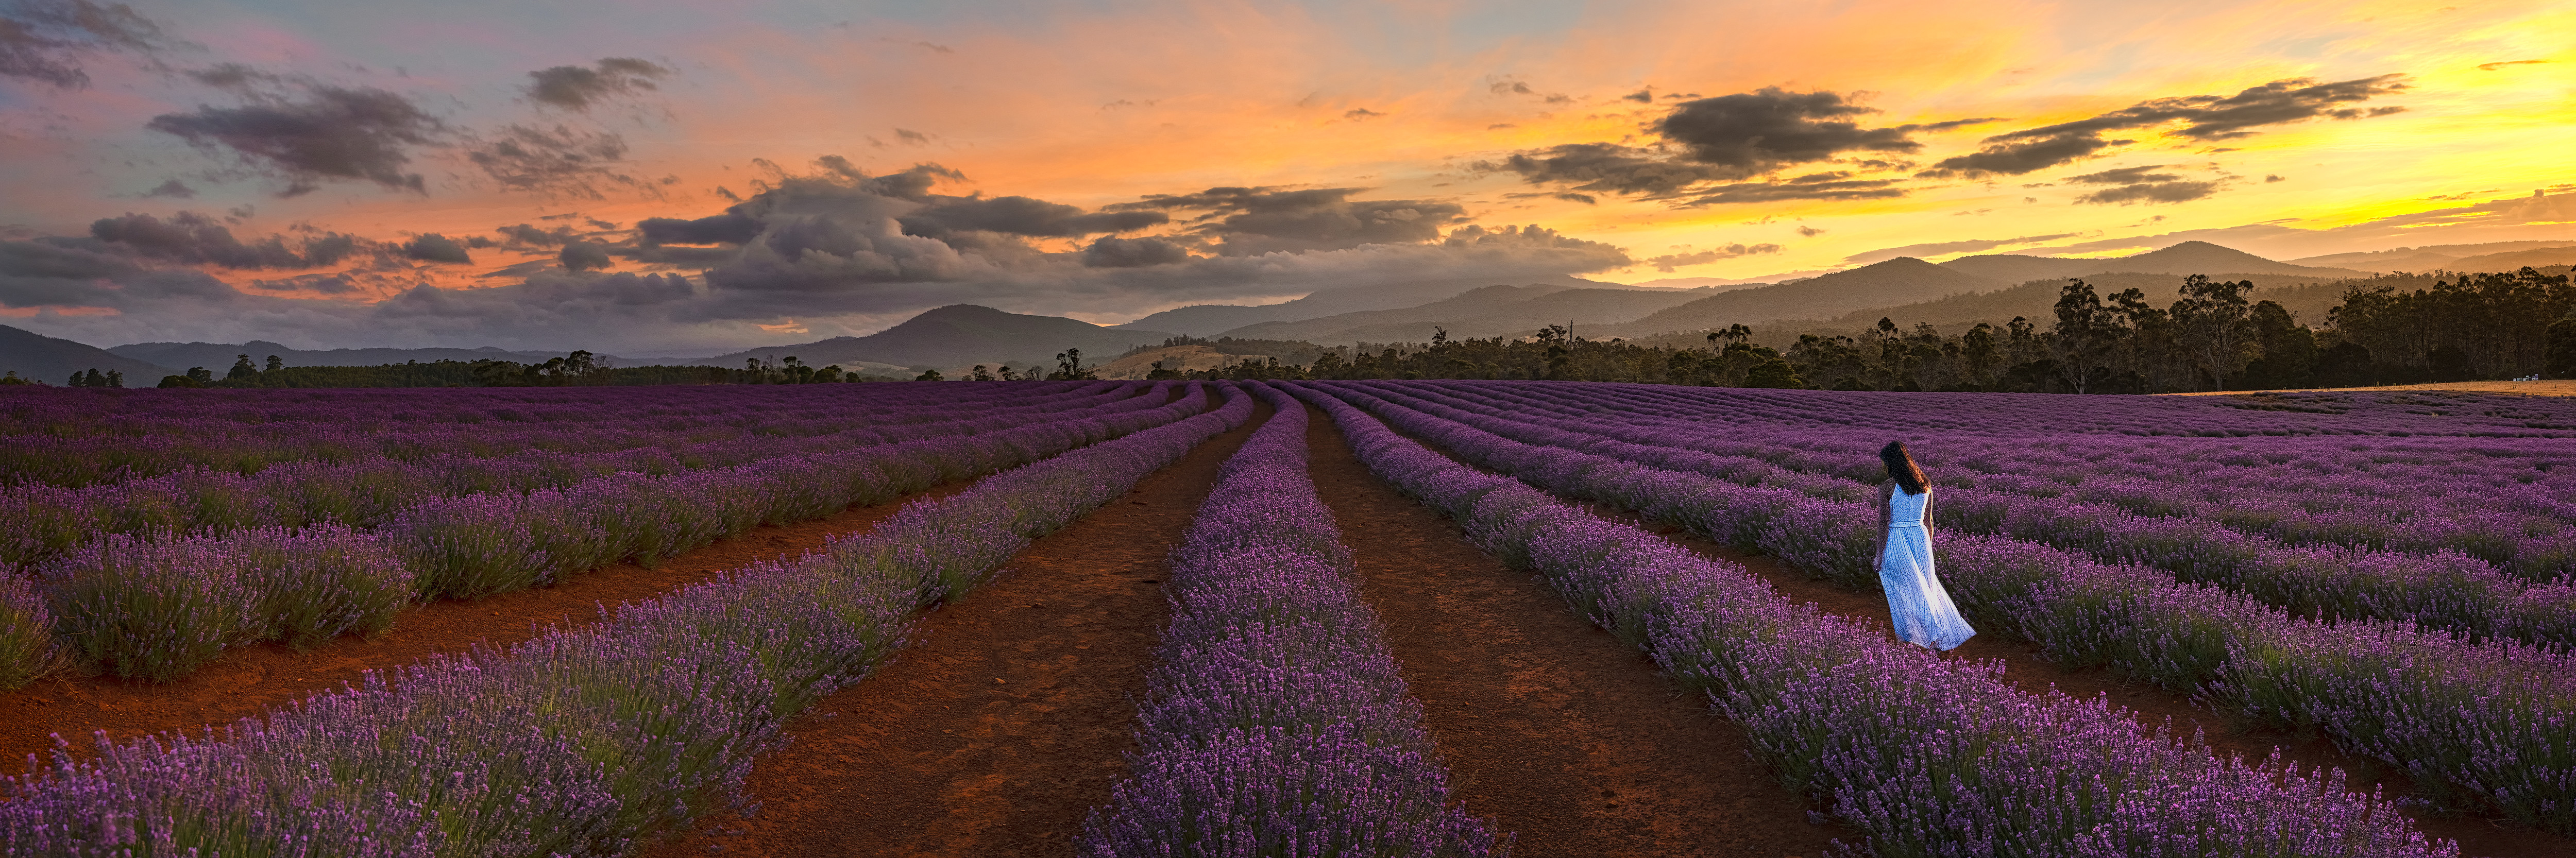 Wallpapers lavender field view sunset on the desktop